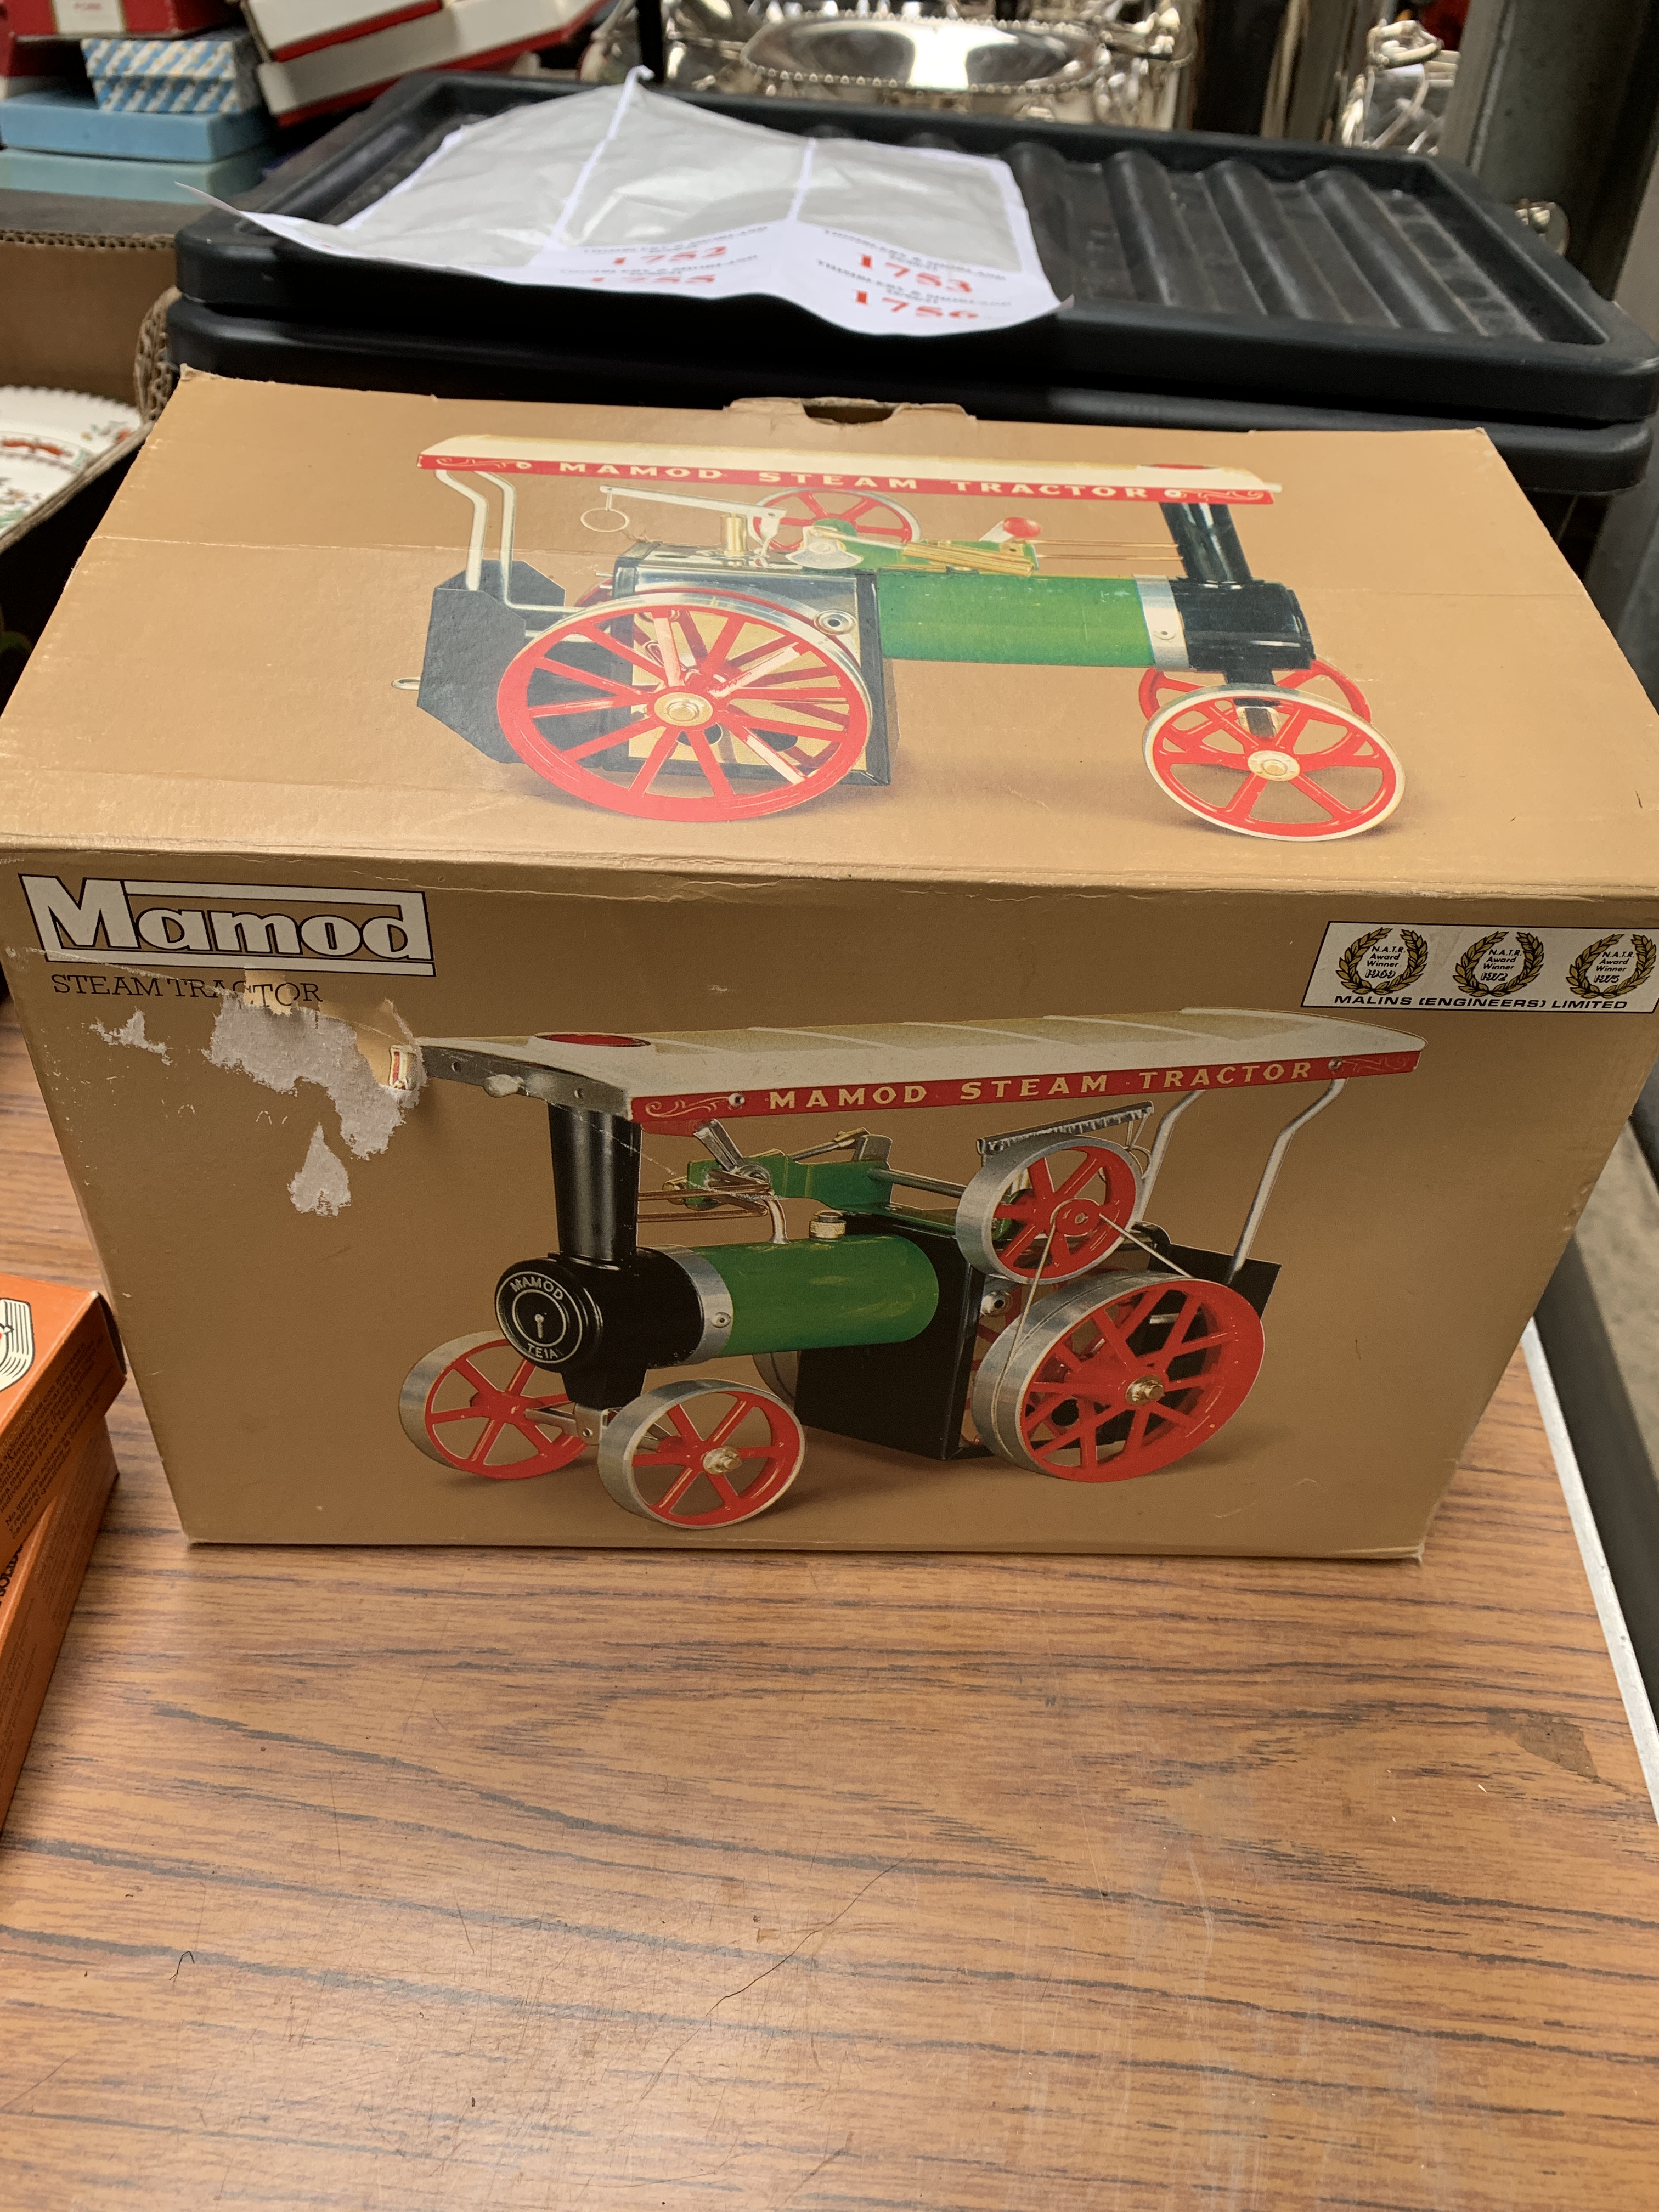 Mamod model Steam Tractor - Image 2 of 2